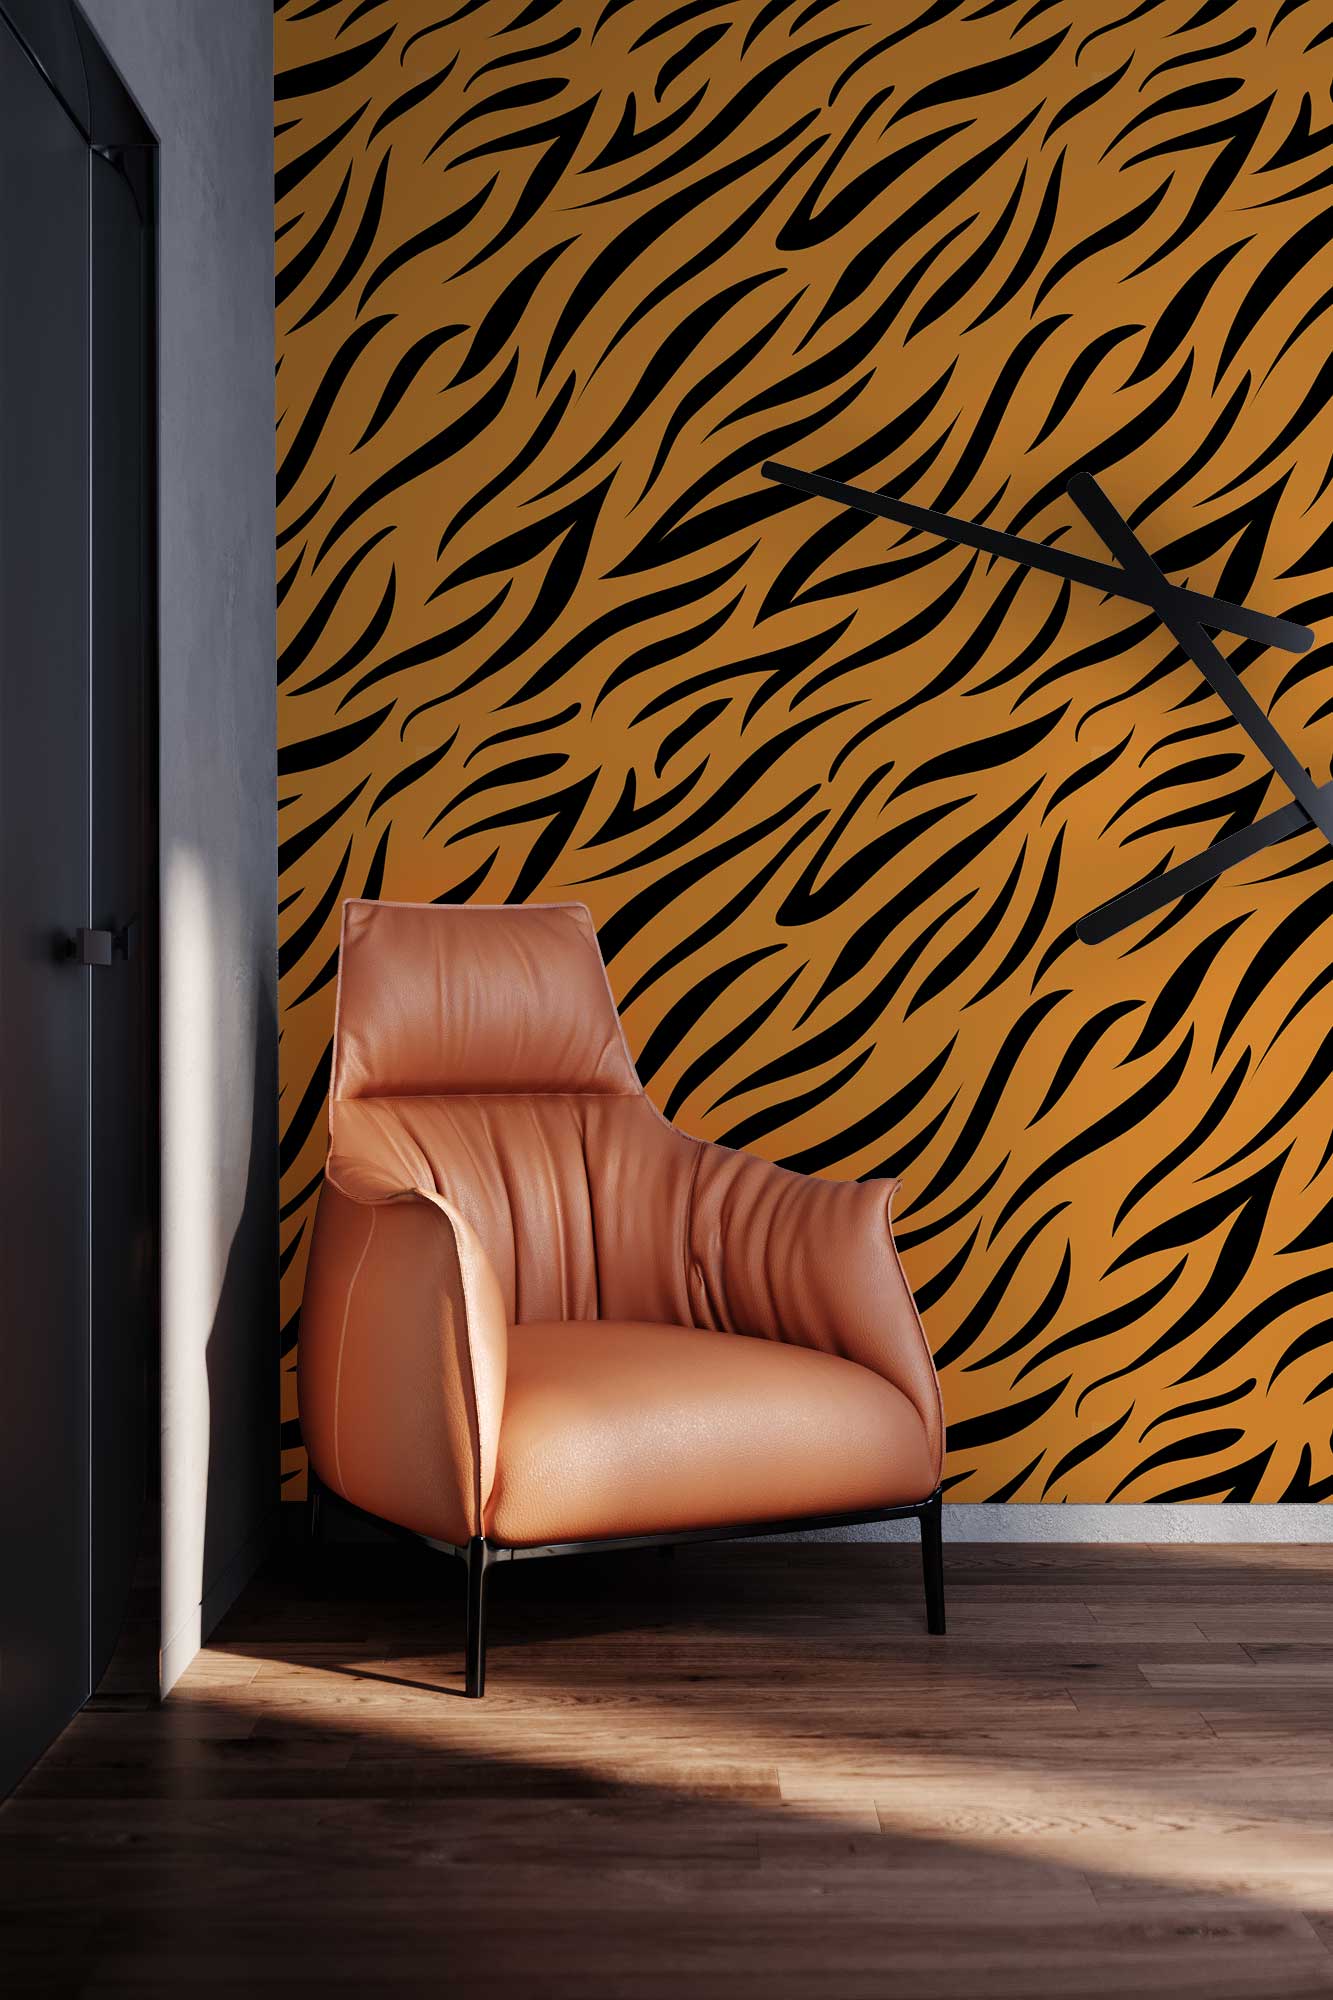 wallpaper mural for your house or hallway decorated with faux fur and animal skin.